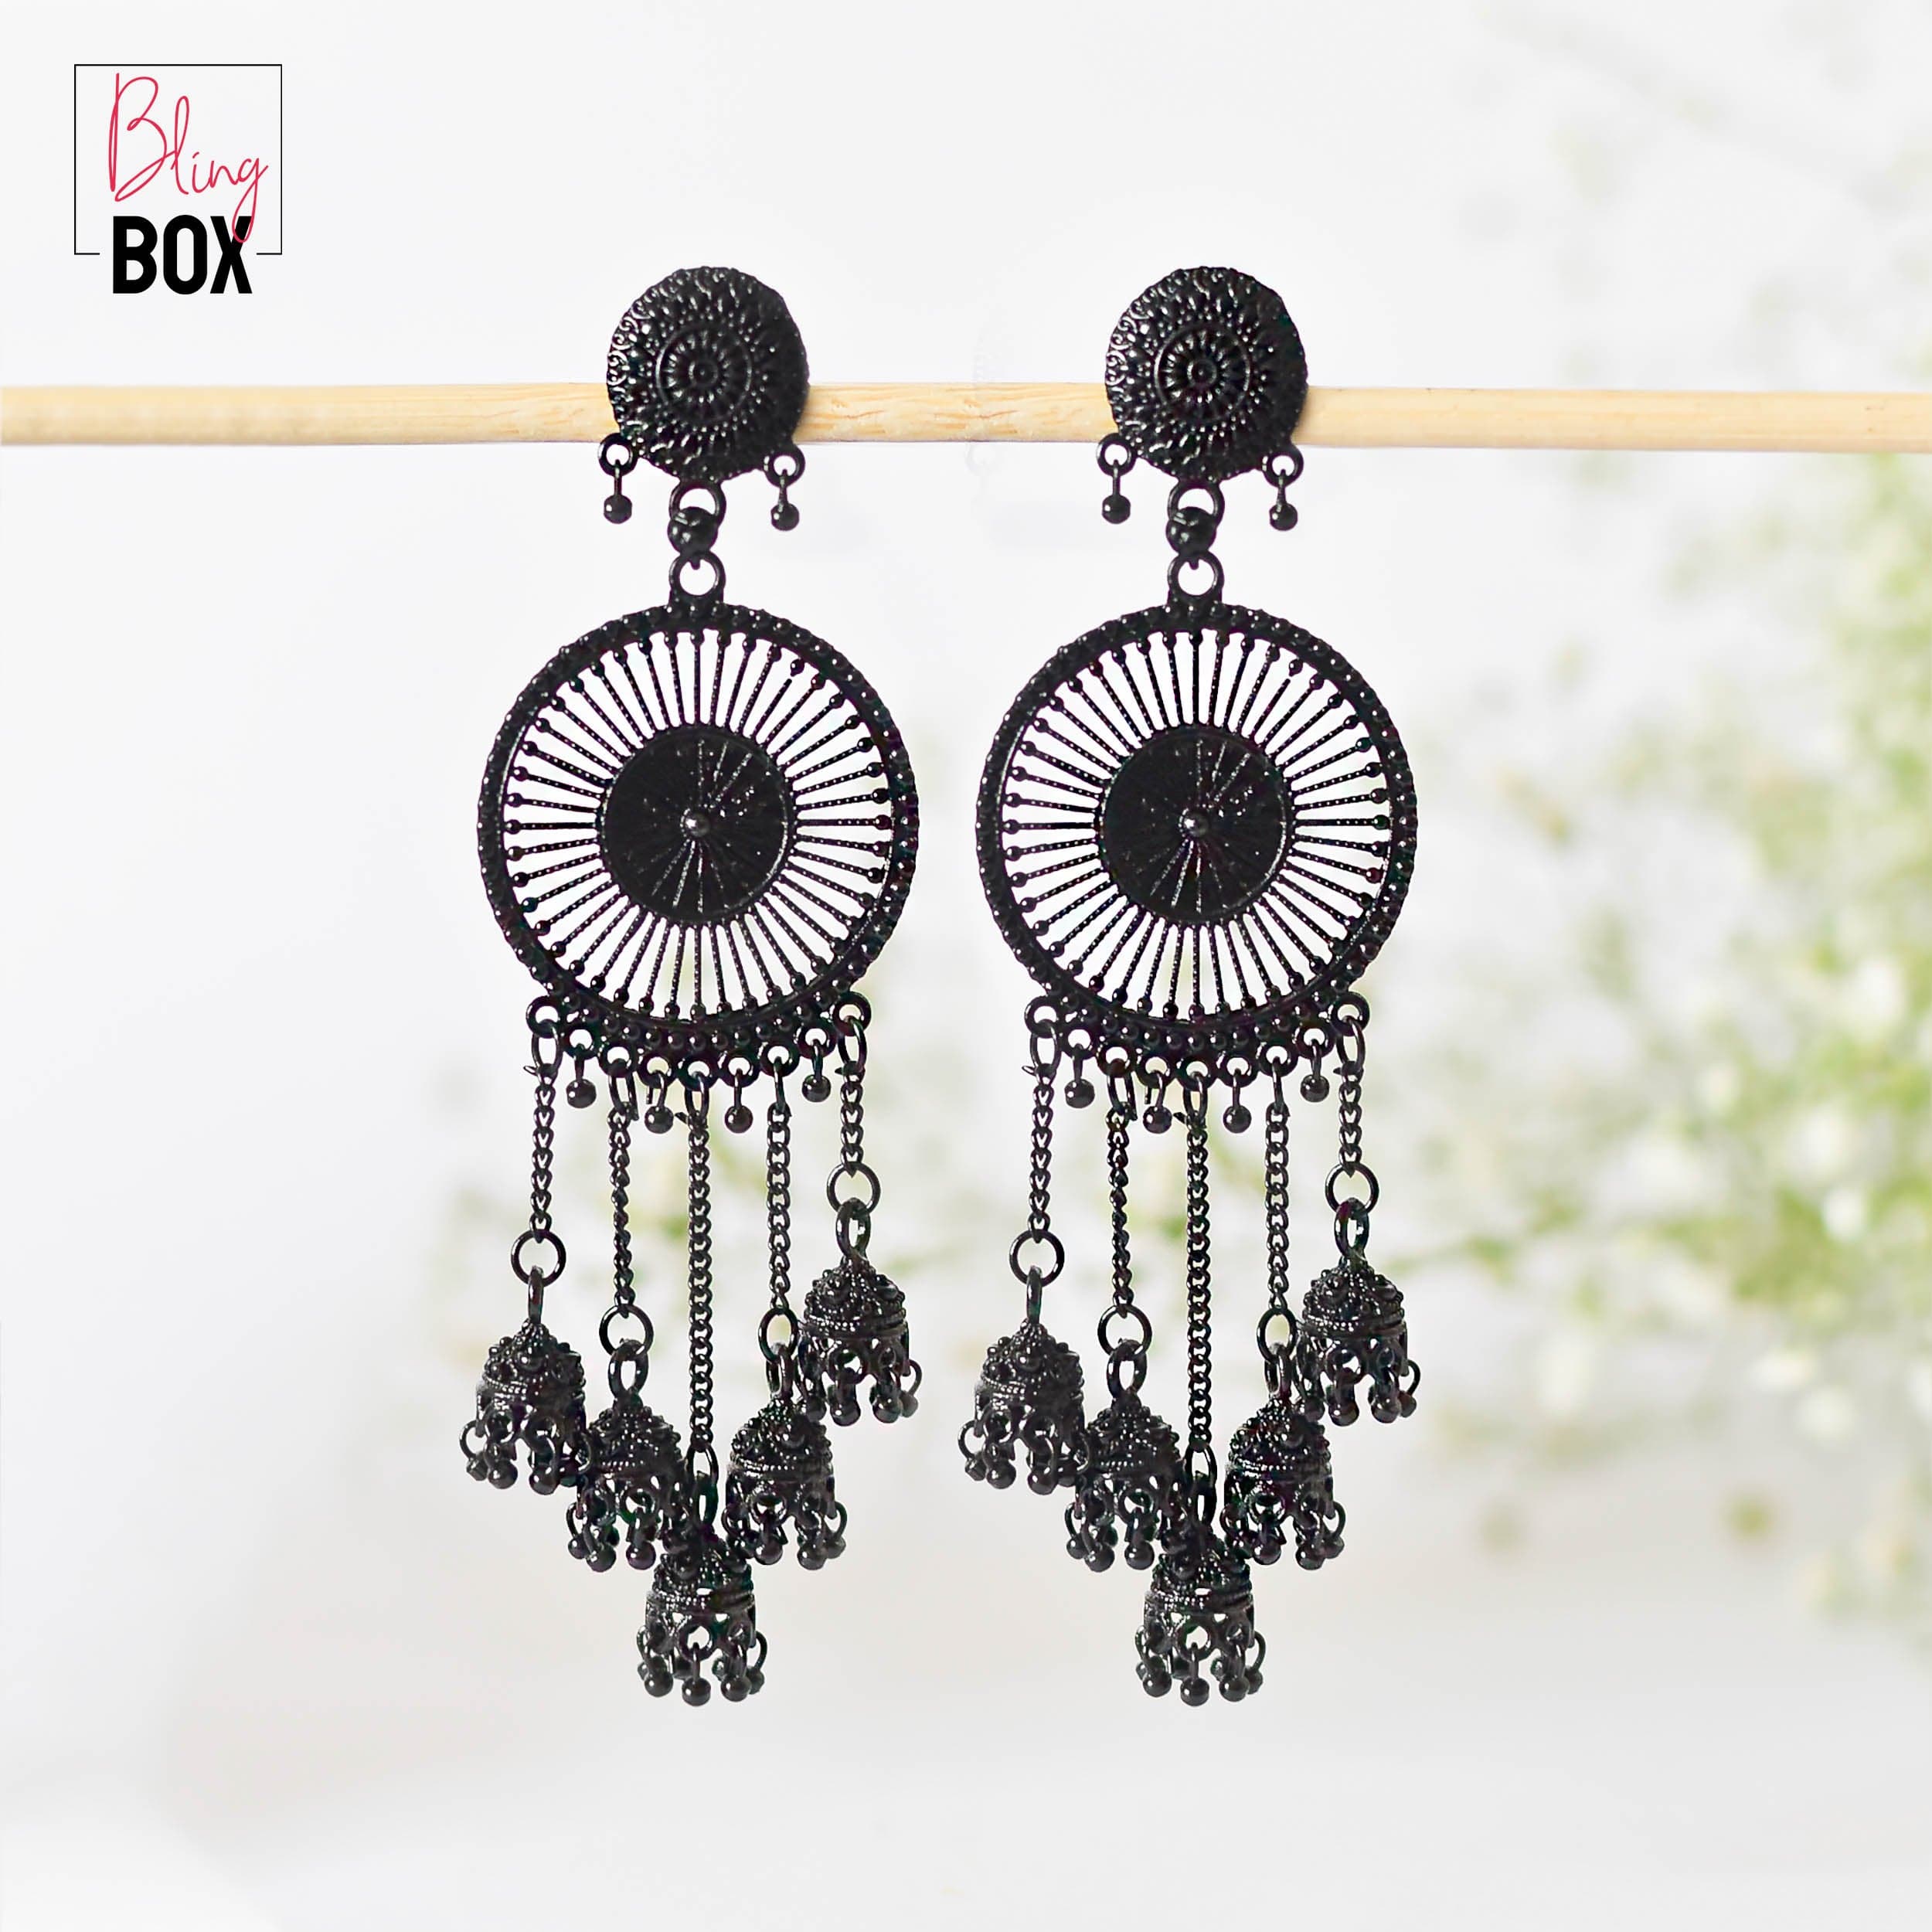 Amazon.com: Silver Dream Catcher Earrings - Hanging with Feather - 925  Sterling Silver - Earring Indian - Gift Box : Handmade Products